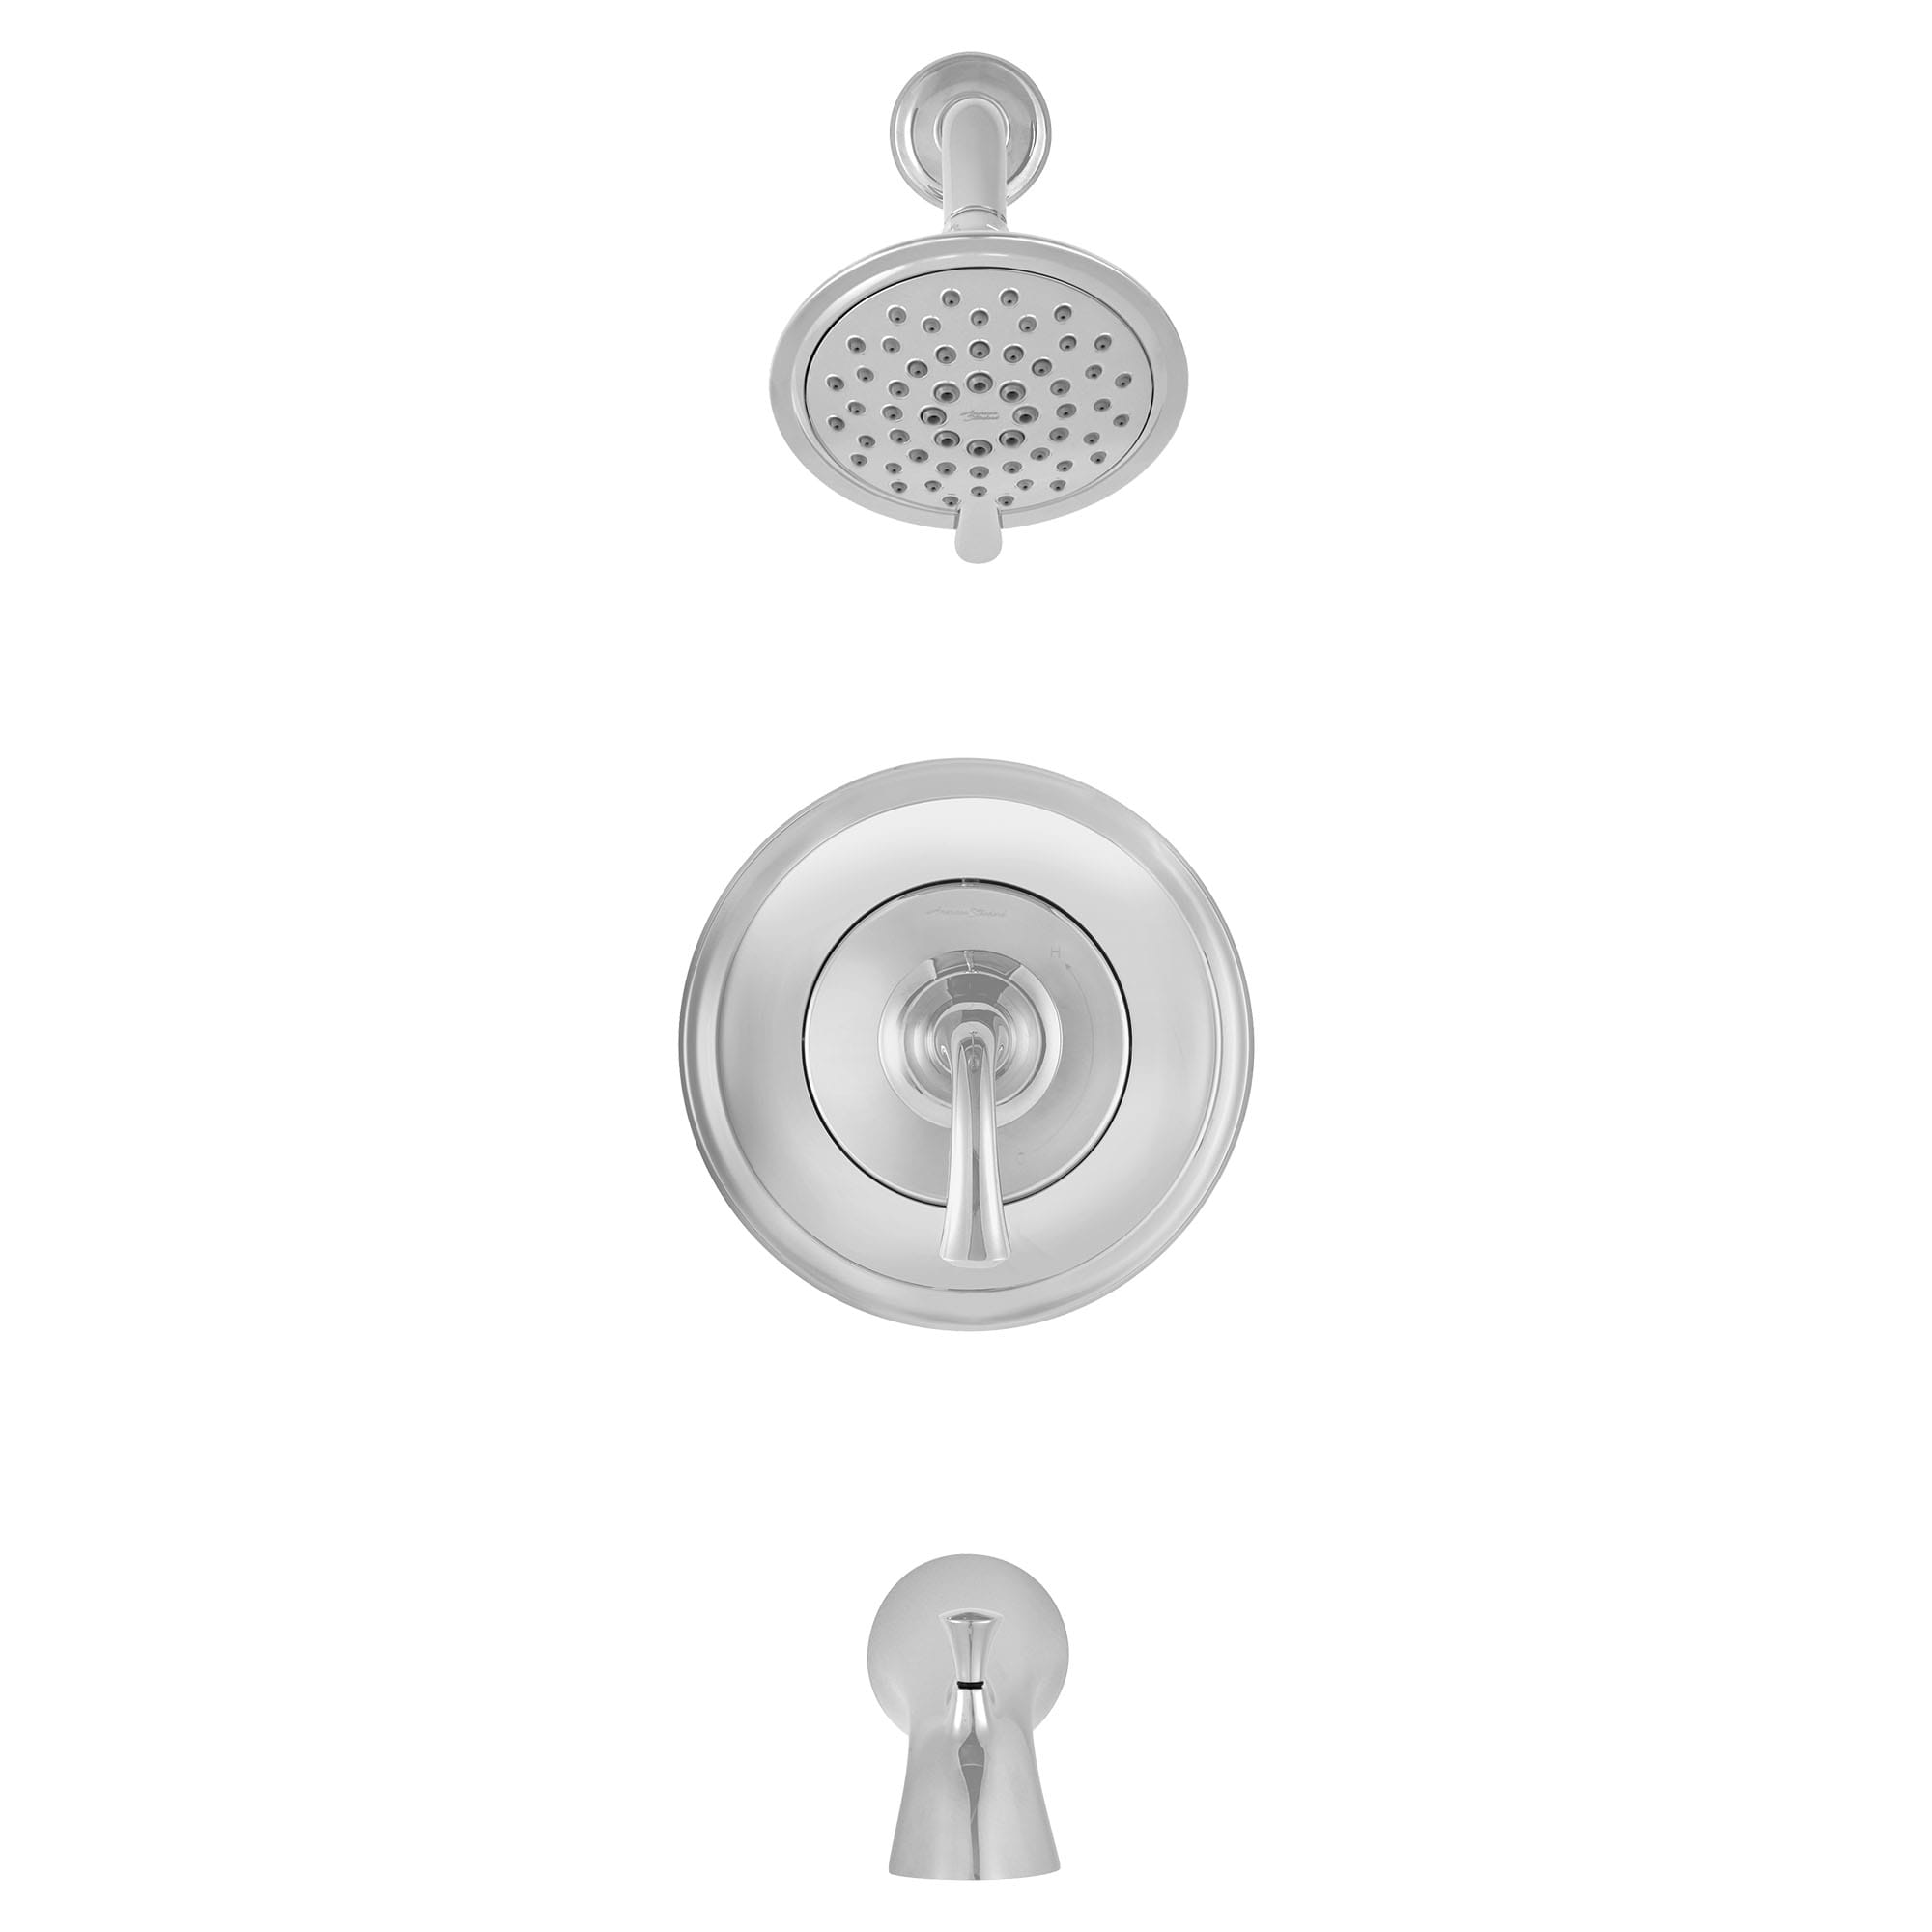 Patience 175 gpm 66 L min Tub and Shower Trim Kit With Water Saving 3 Function Showerhead Double Ceramic Pressure Balance Cartridge With Lever Handle CHROME